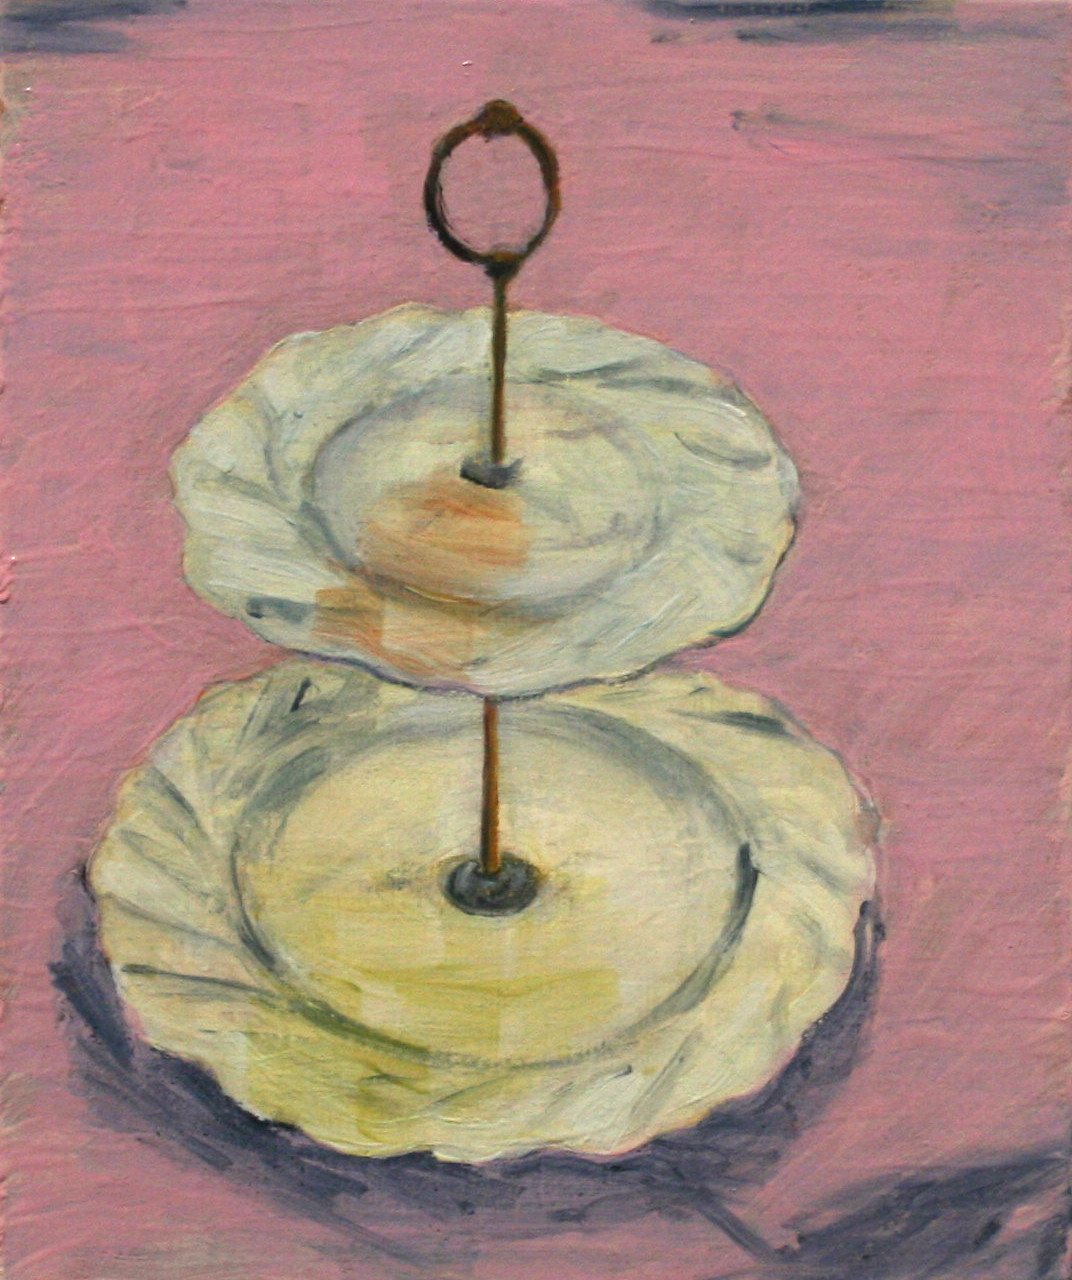 Tiered Dish,30x20cm Oil on Canvas 2013